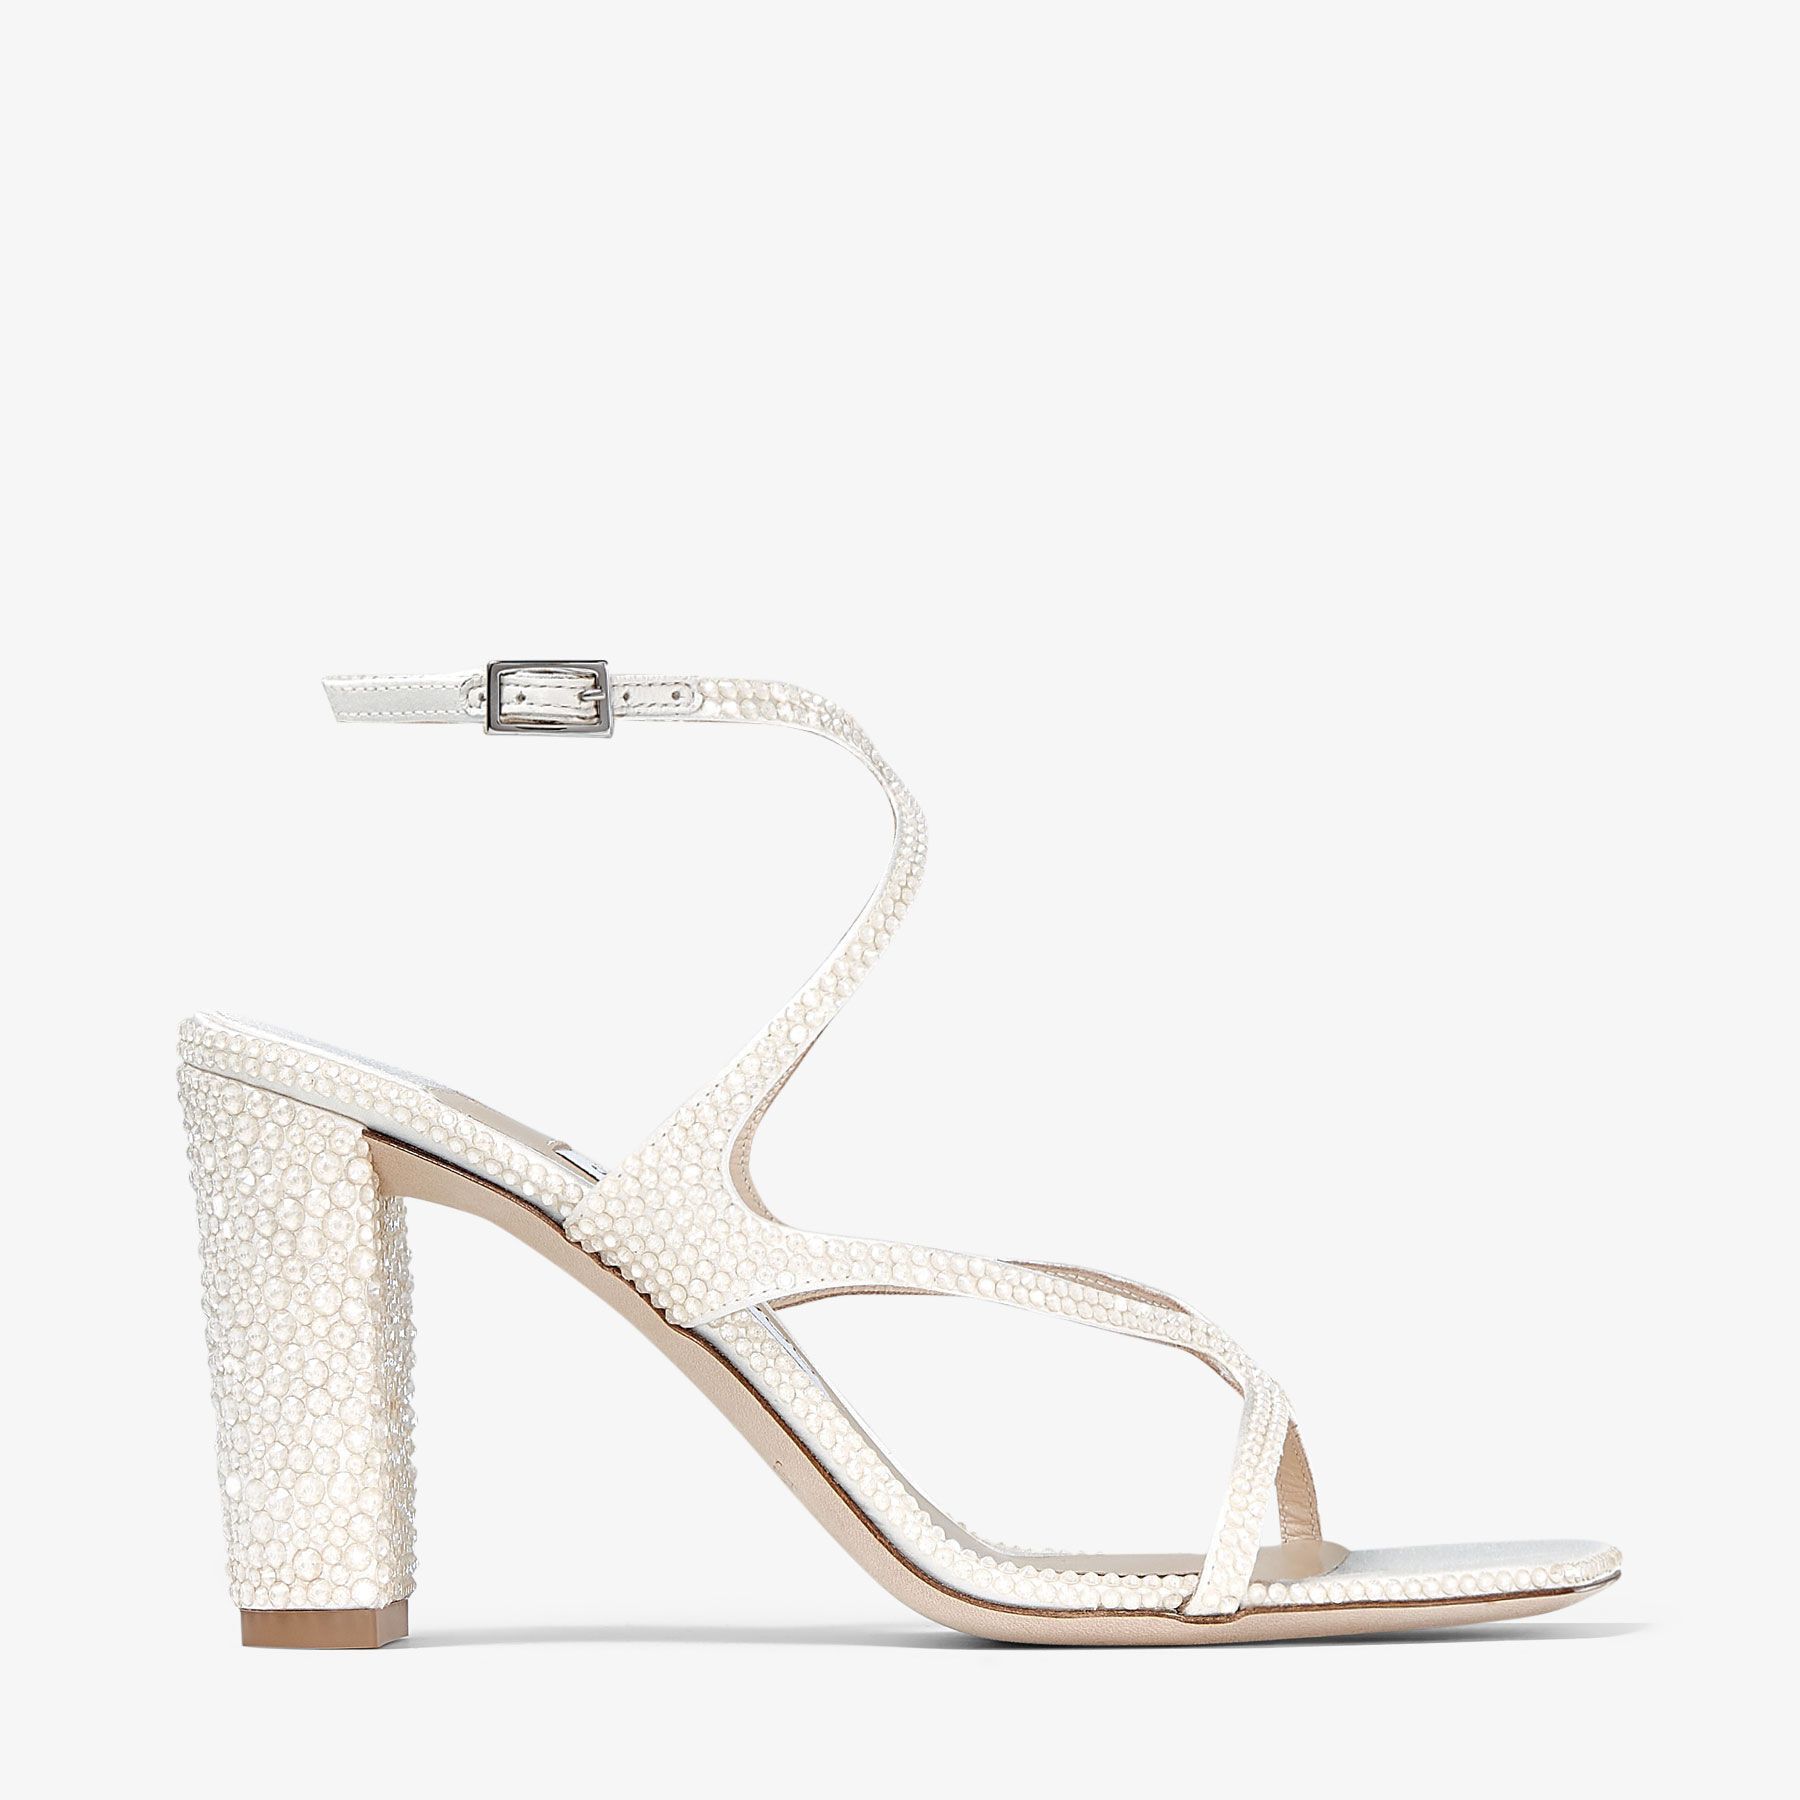 Azie 85 | Ivory Satin Sandals with Crystals | JIMMY CHOO